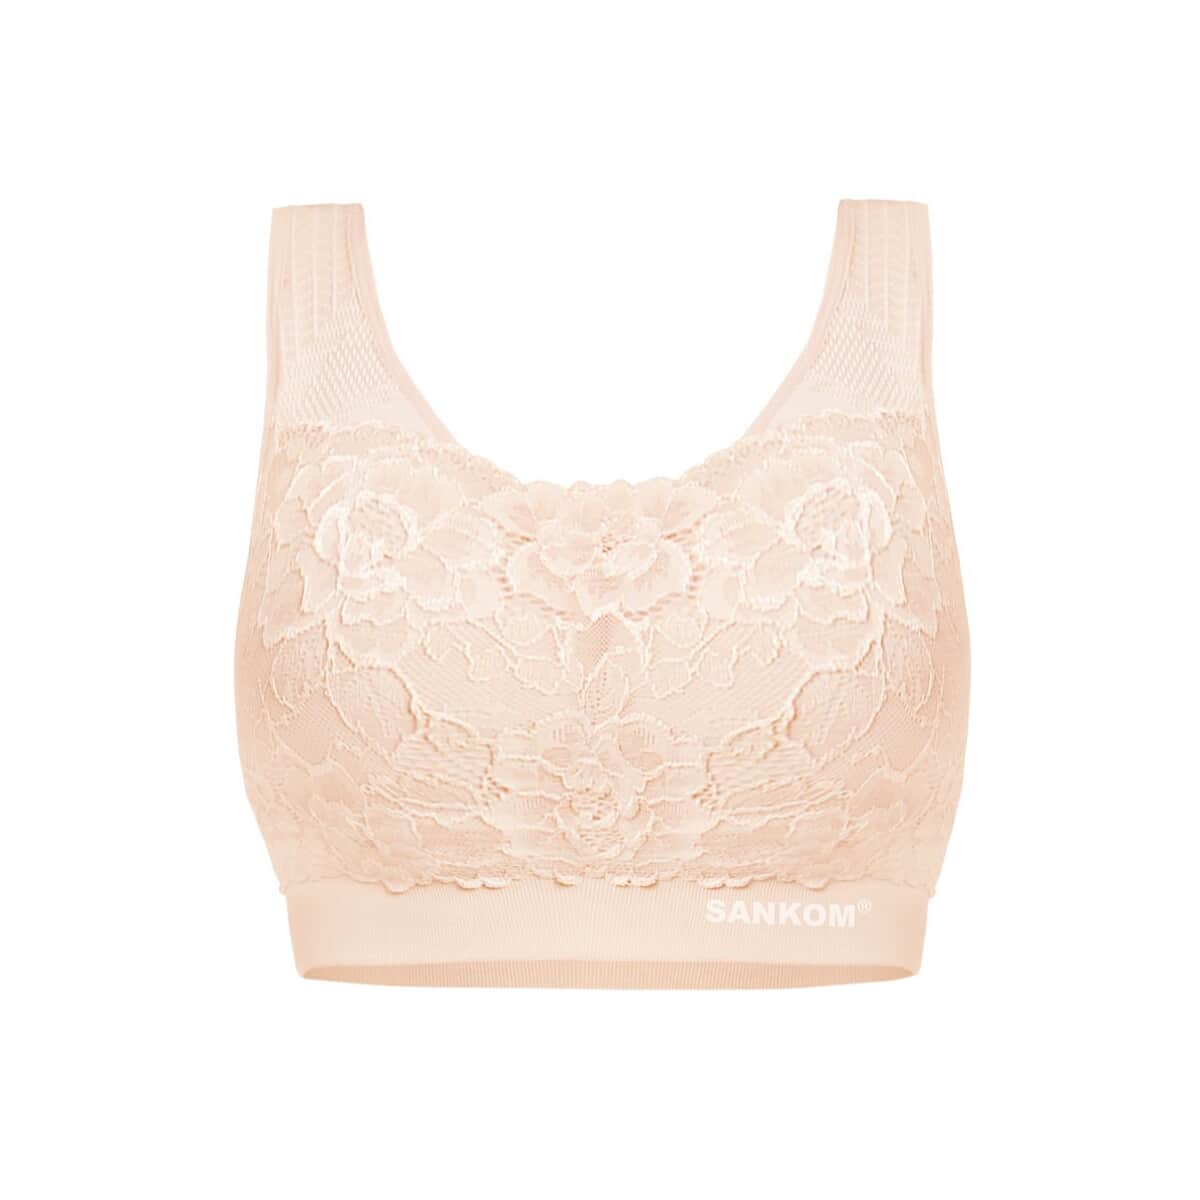 Sankom Patent Light Pink Classic Lace Posture Support Bra - S/M image number 2